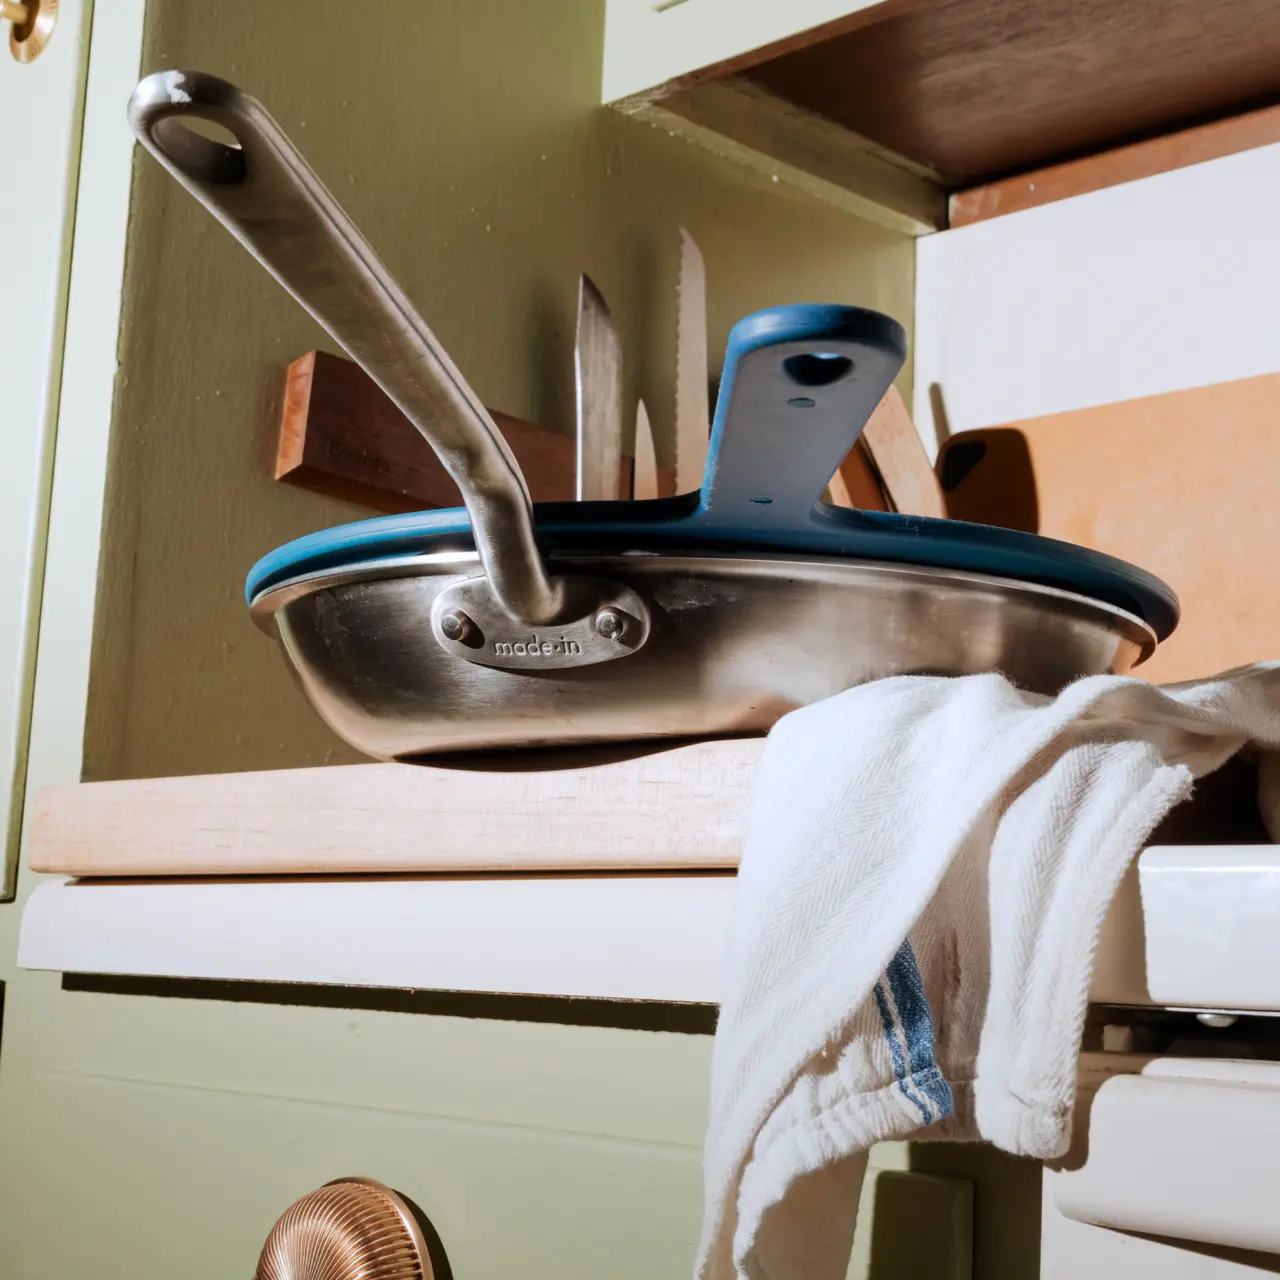 A stainless steel pan with a pair of tongs and a kitchen towel are placed on an open drawer in a home setting.